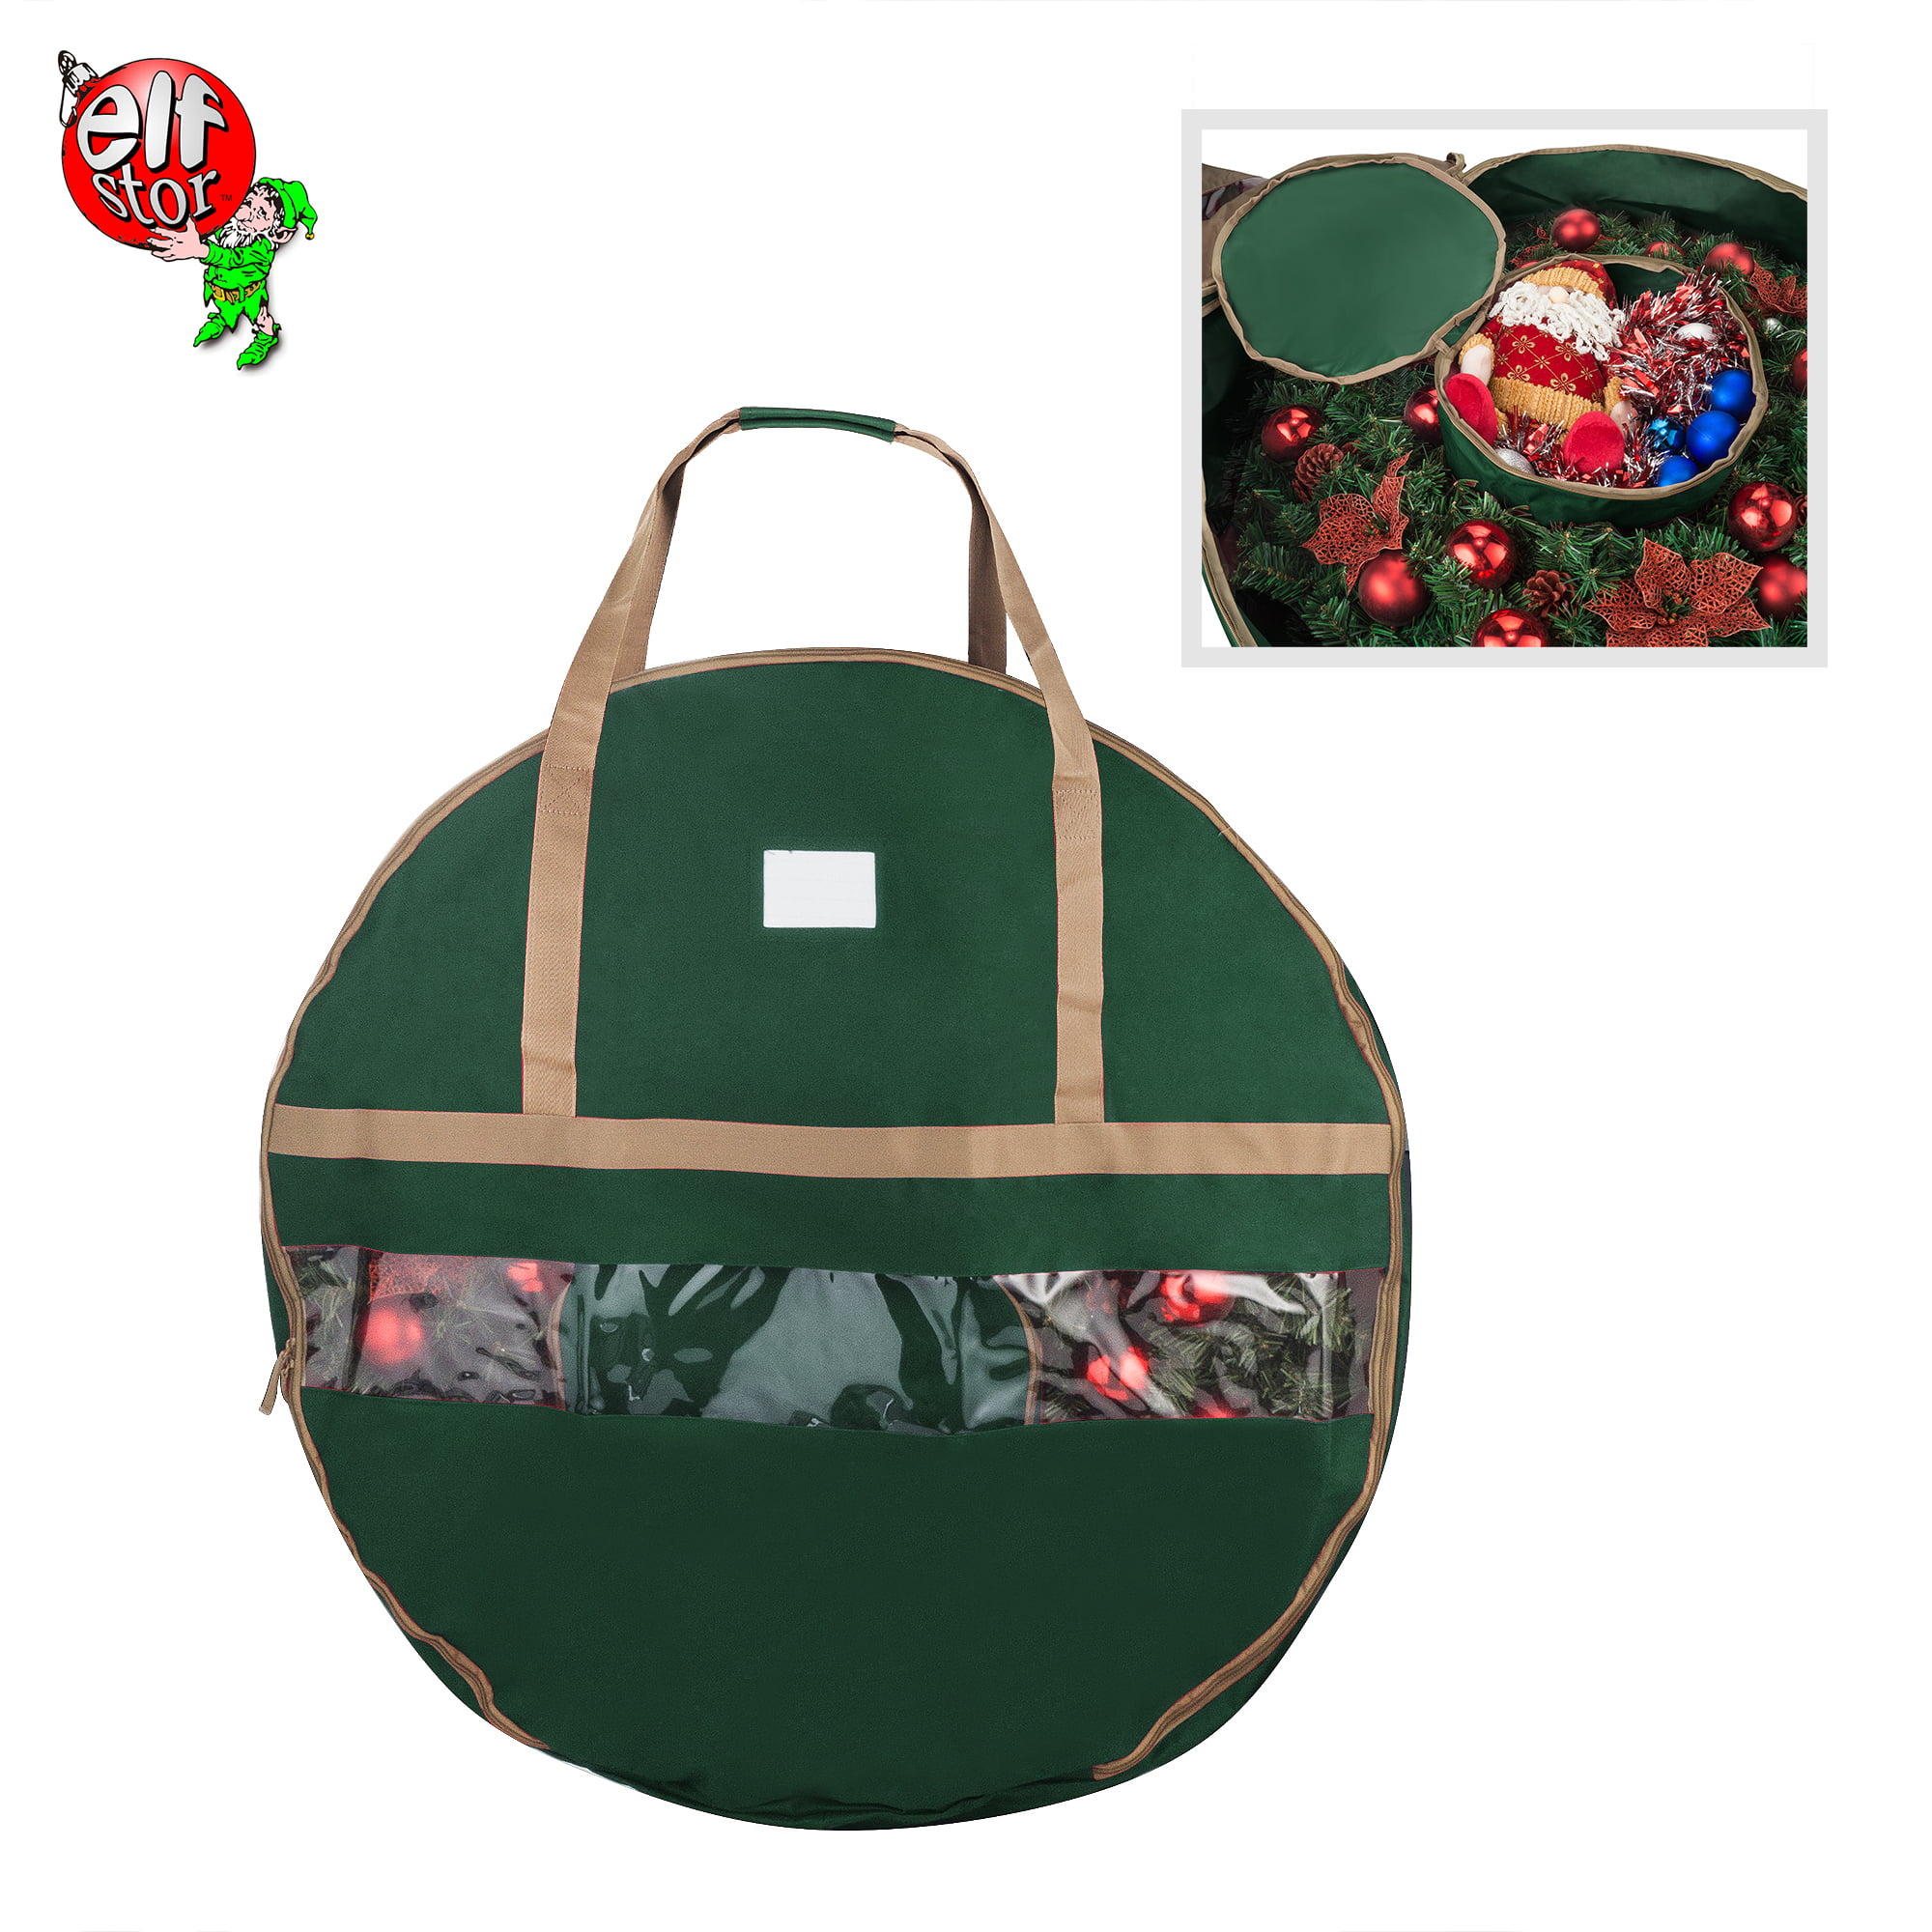 Details about  / Elf Stor Premium Green Holiday Christmas Wreath Storage Bag For 24/" Inch Wreaths